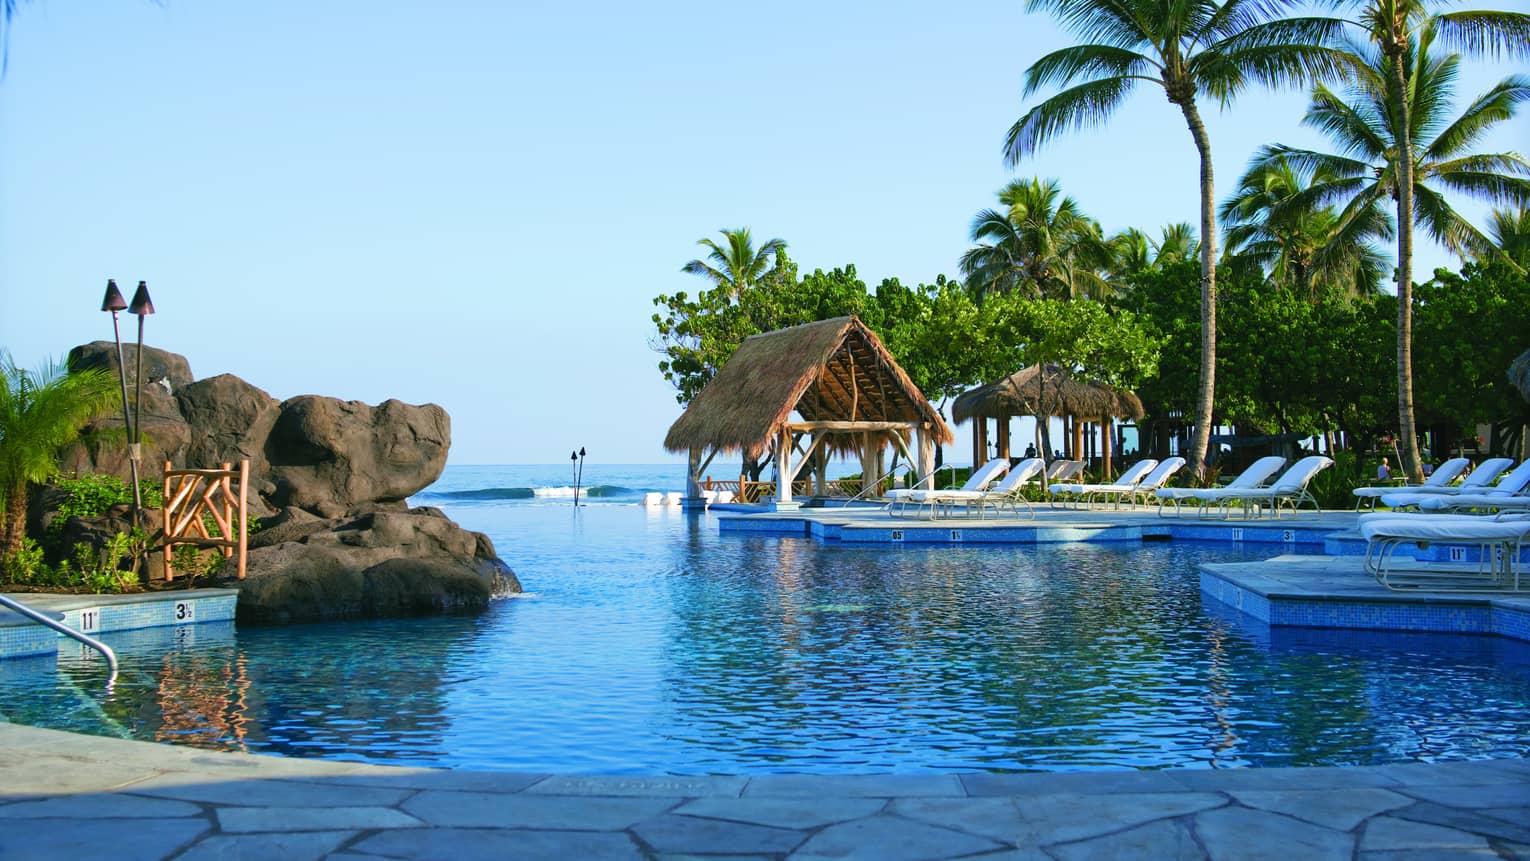 Sea Shell outdoor swimming pool with large boulders, thatched-roof hut